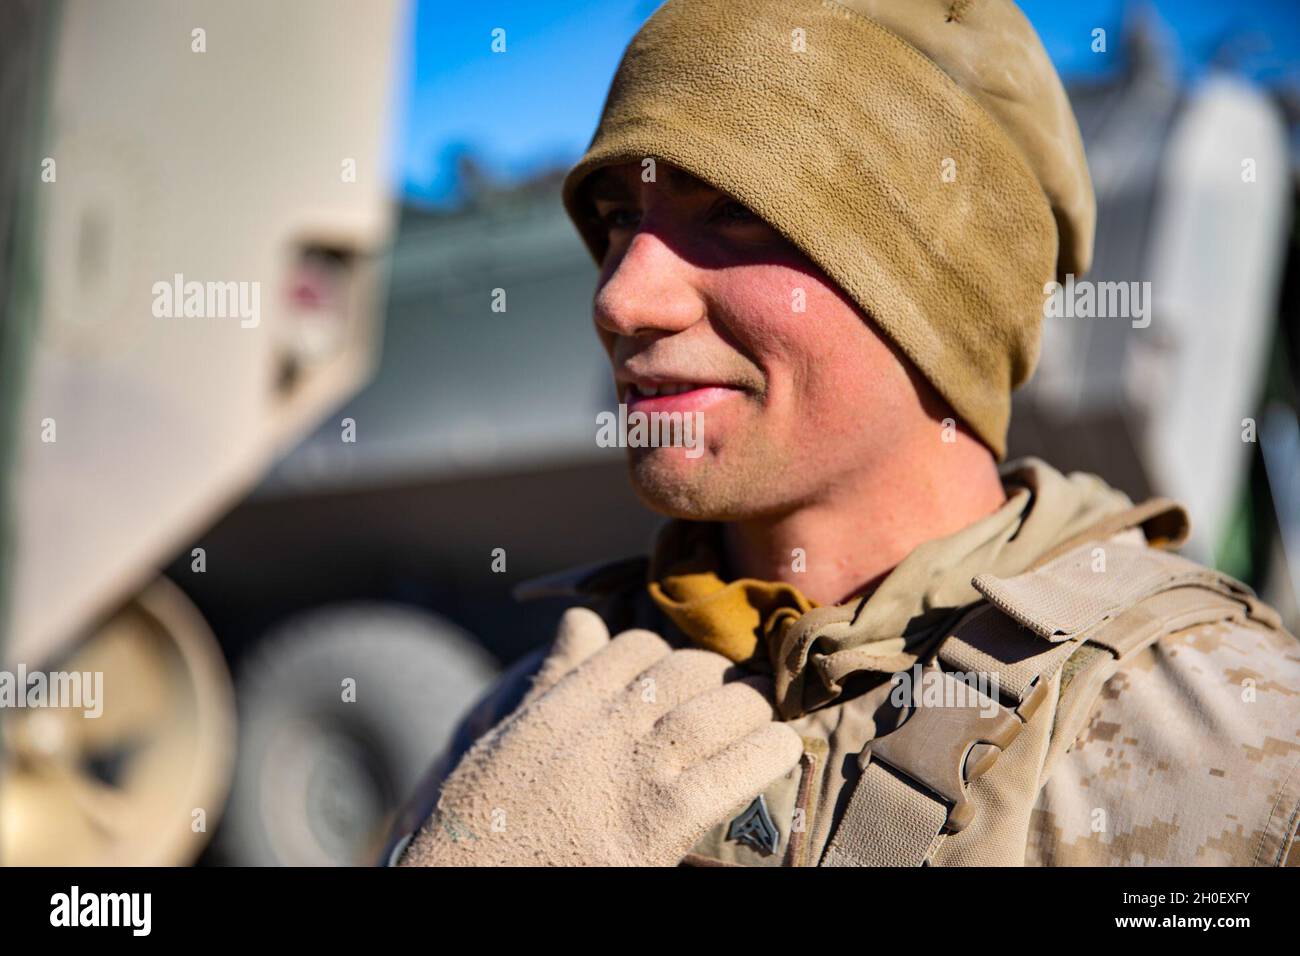 U.S. Marine Cpl. Caleb Polland, an Amphibious Combat Vehicle (ACV) crew chief with Co. D, 3rd Assault Amphibian Battalion, 1st Marine Division, poses for a photograph at the conclusion of Marine Air Ground Task Force Warfighting Exercise (MWX) 2-21 at Marine Corps Air Ground Combat Center, Twentynine Palms, Calif., February 18, 2021. MWX 2-21 was the first time ACVs were employed during a 1st Marine Division training exercise. Stock Photo